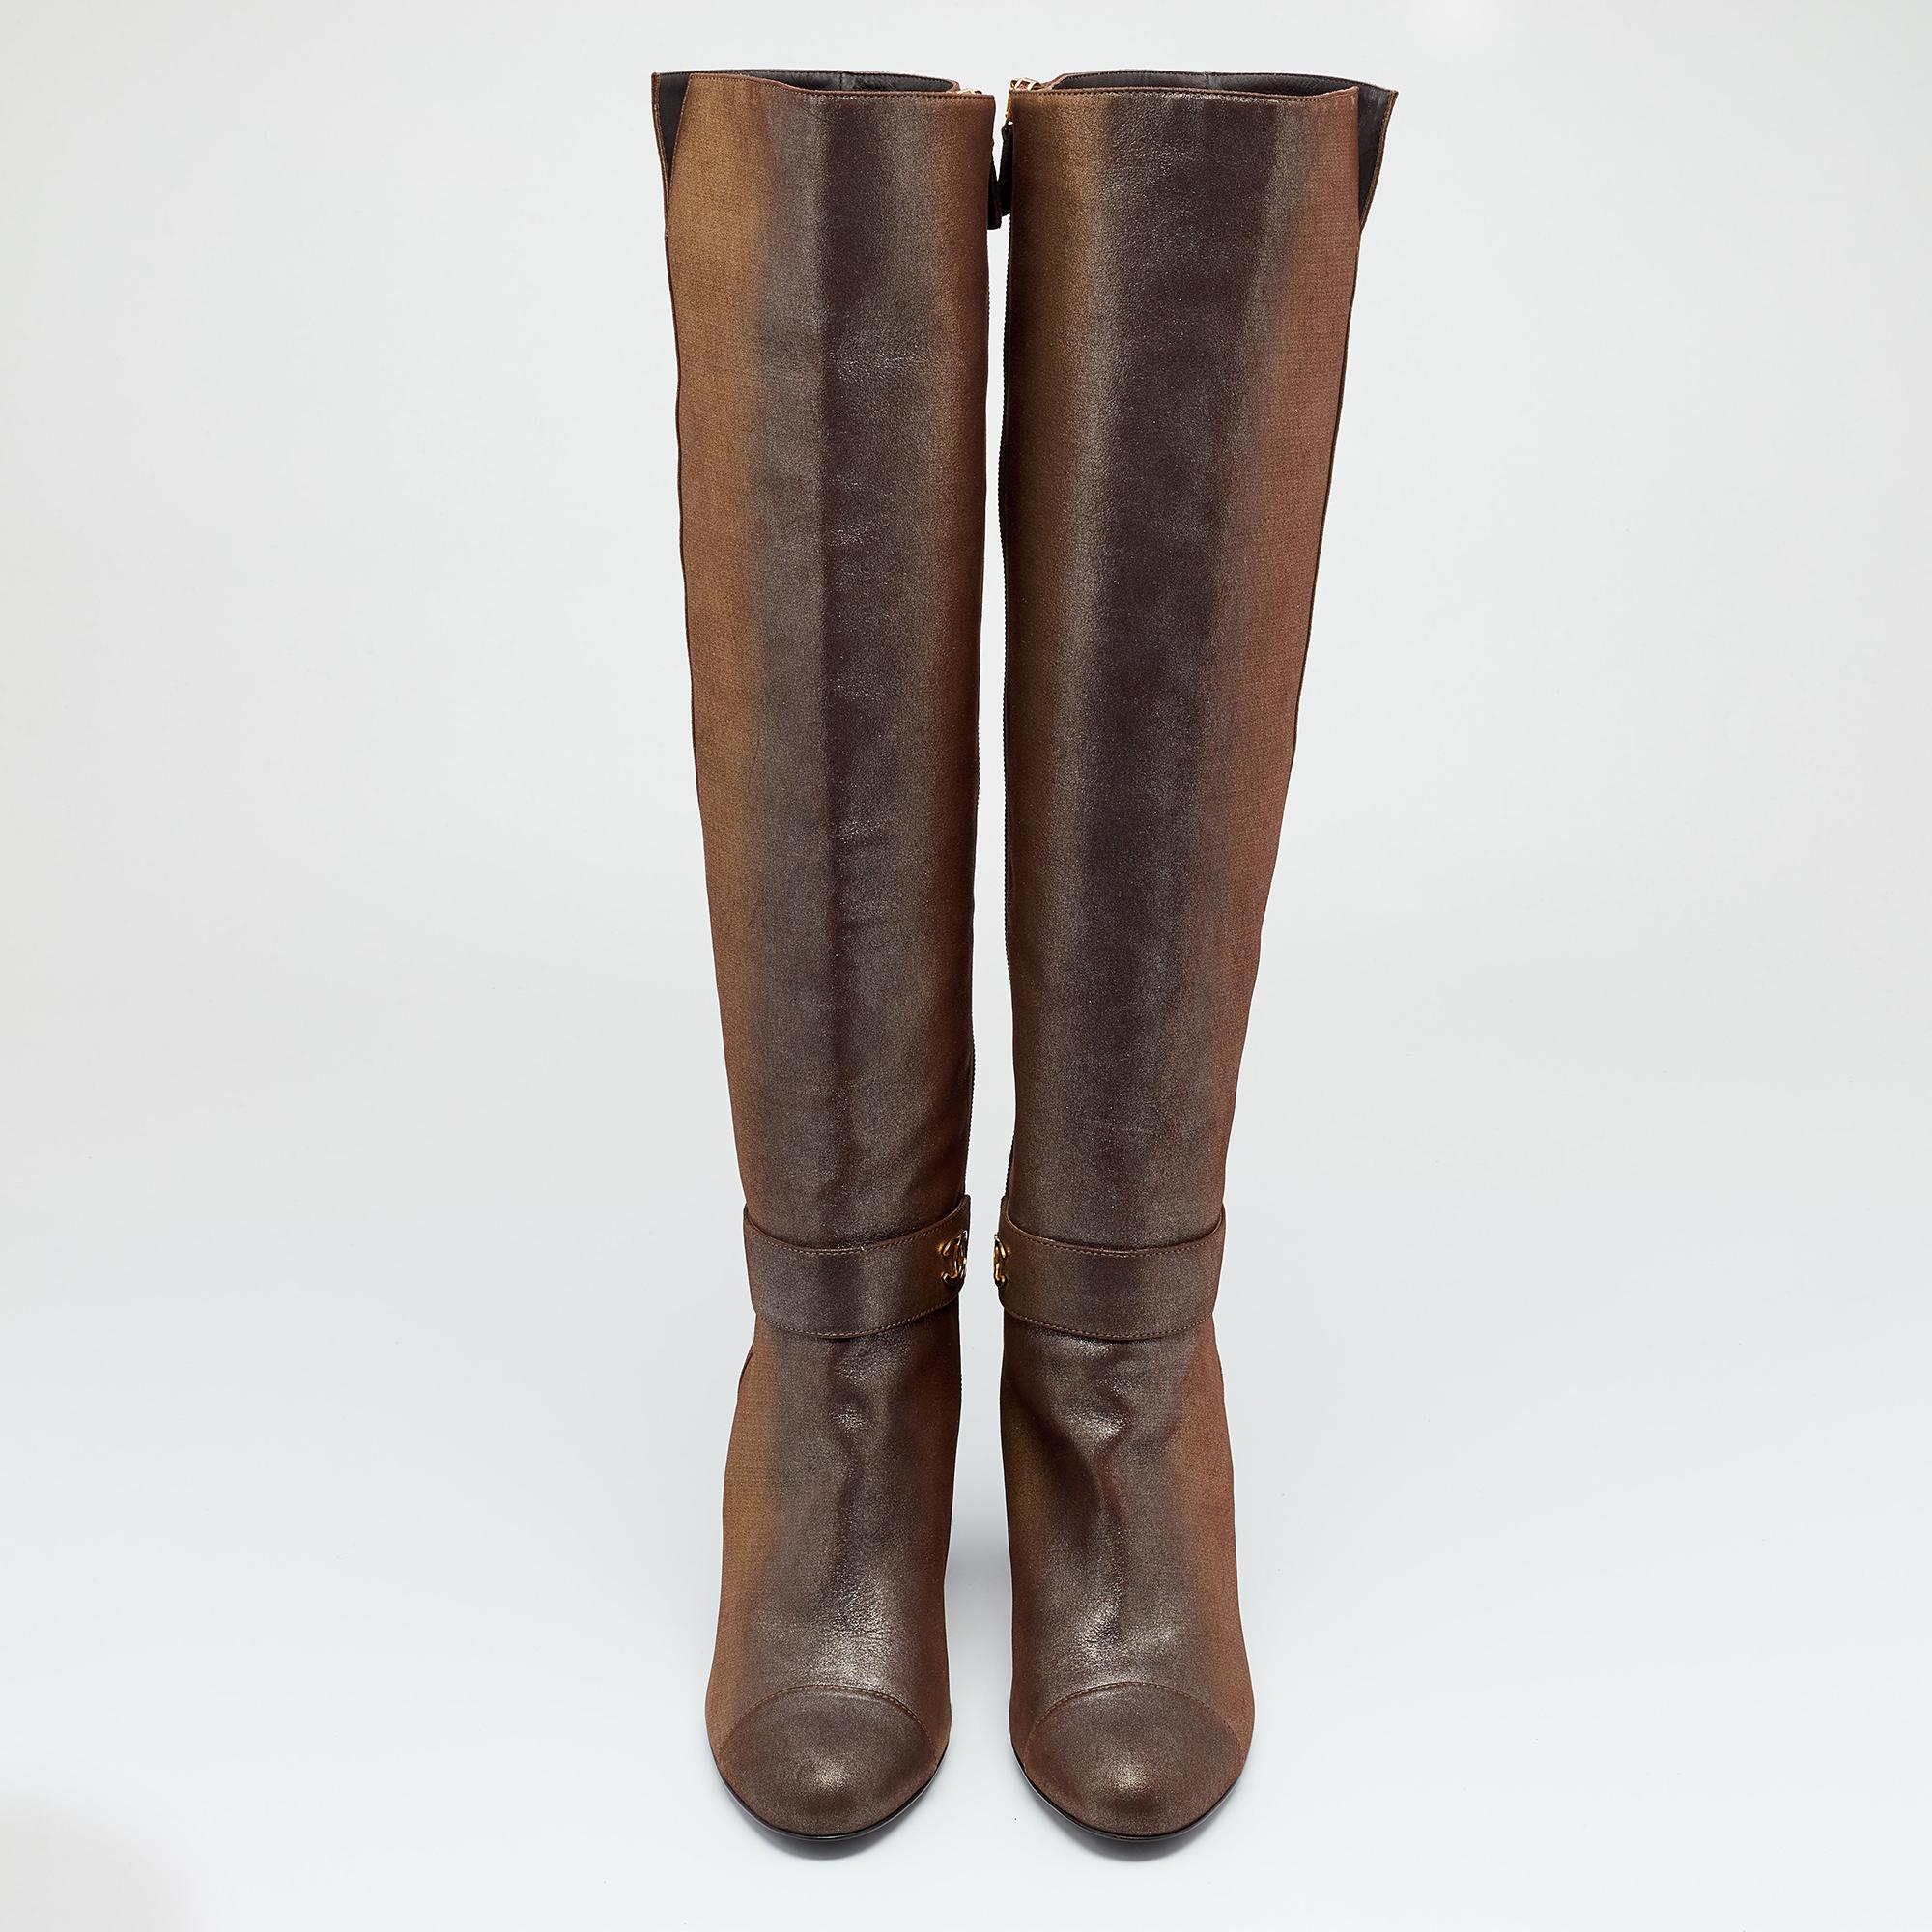 Add an edgy touch to your look with these knee-length boots from Chanel. Crafted in multicolored leather, the pair has closed toes, zippers, and gold-tone hardware. Sturdy soles and comfortable insoles contribute to making these boots ideal for